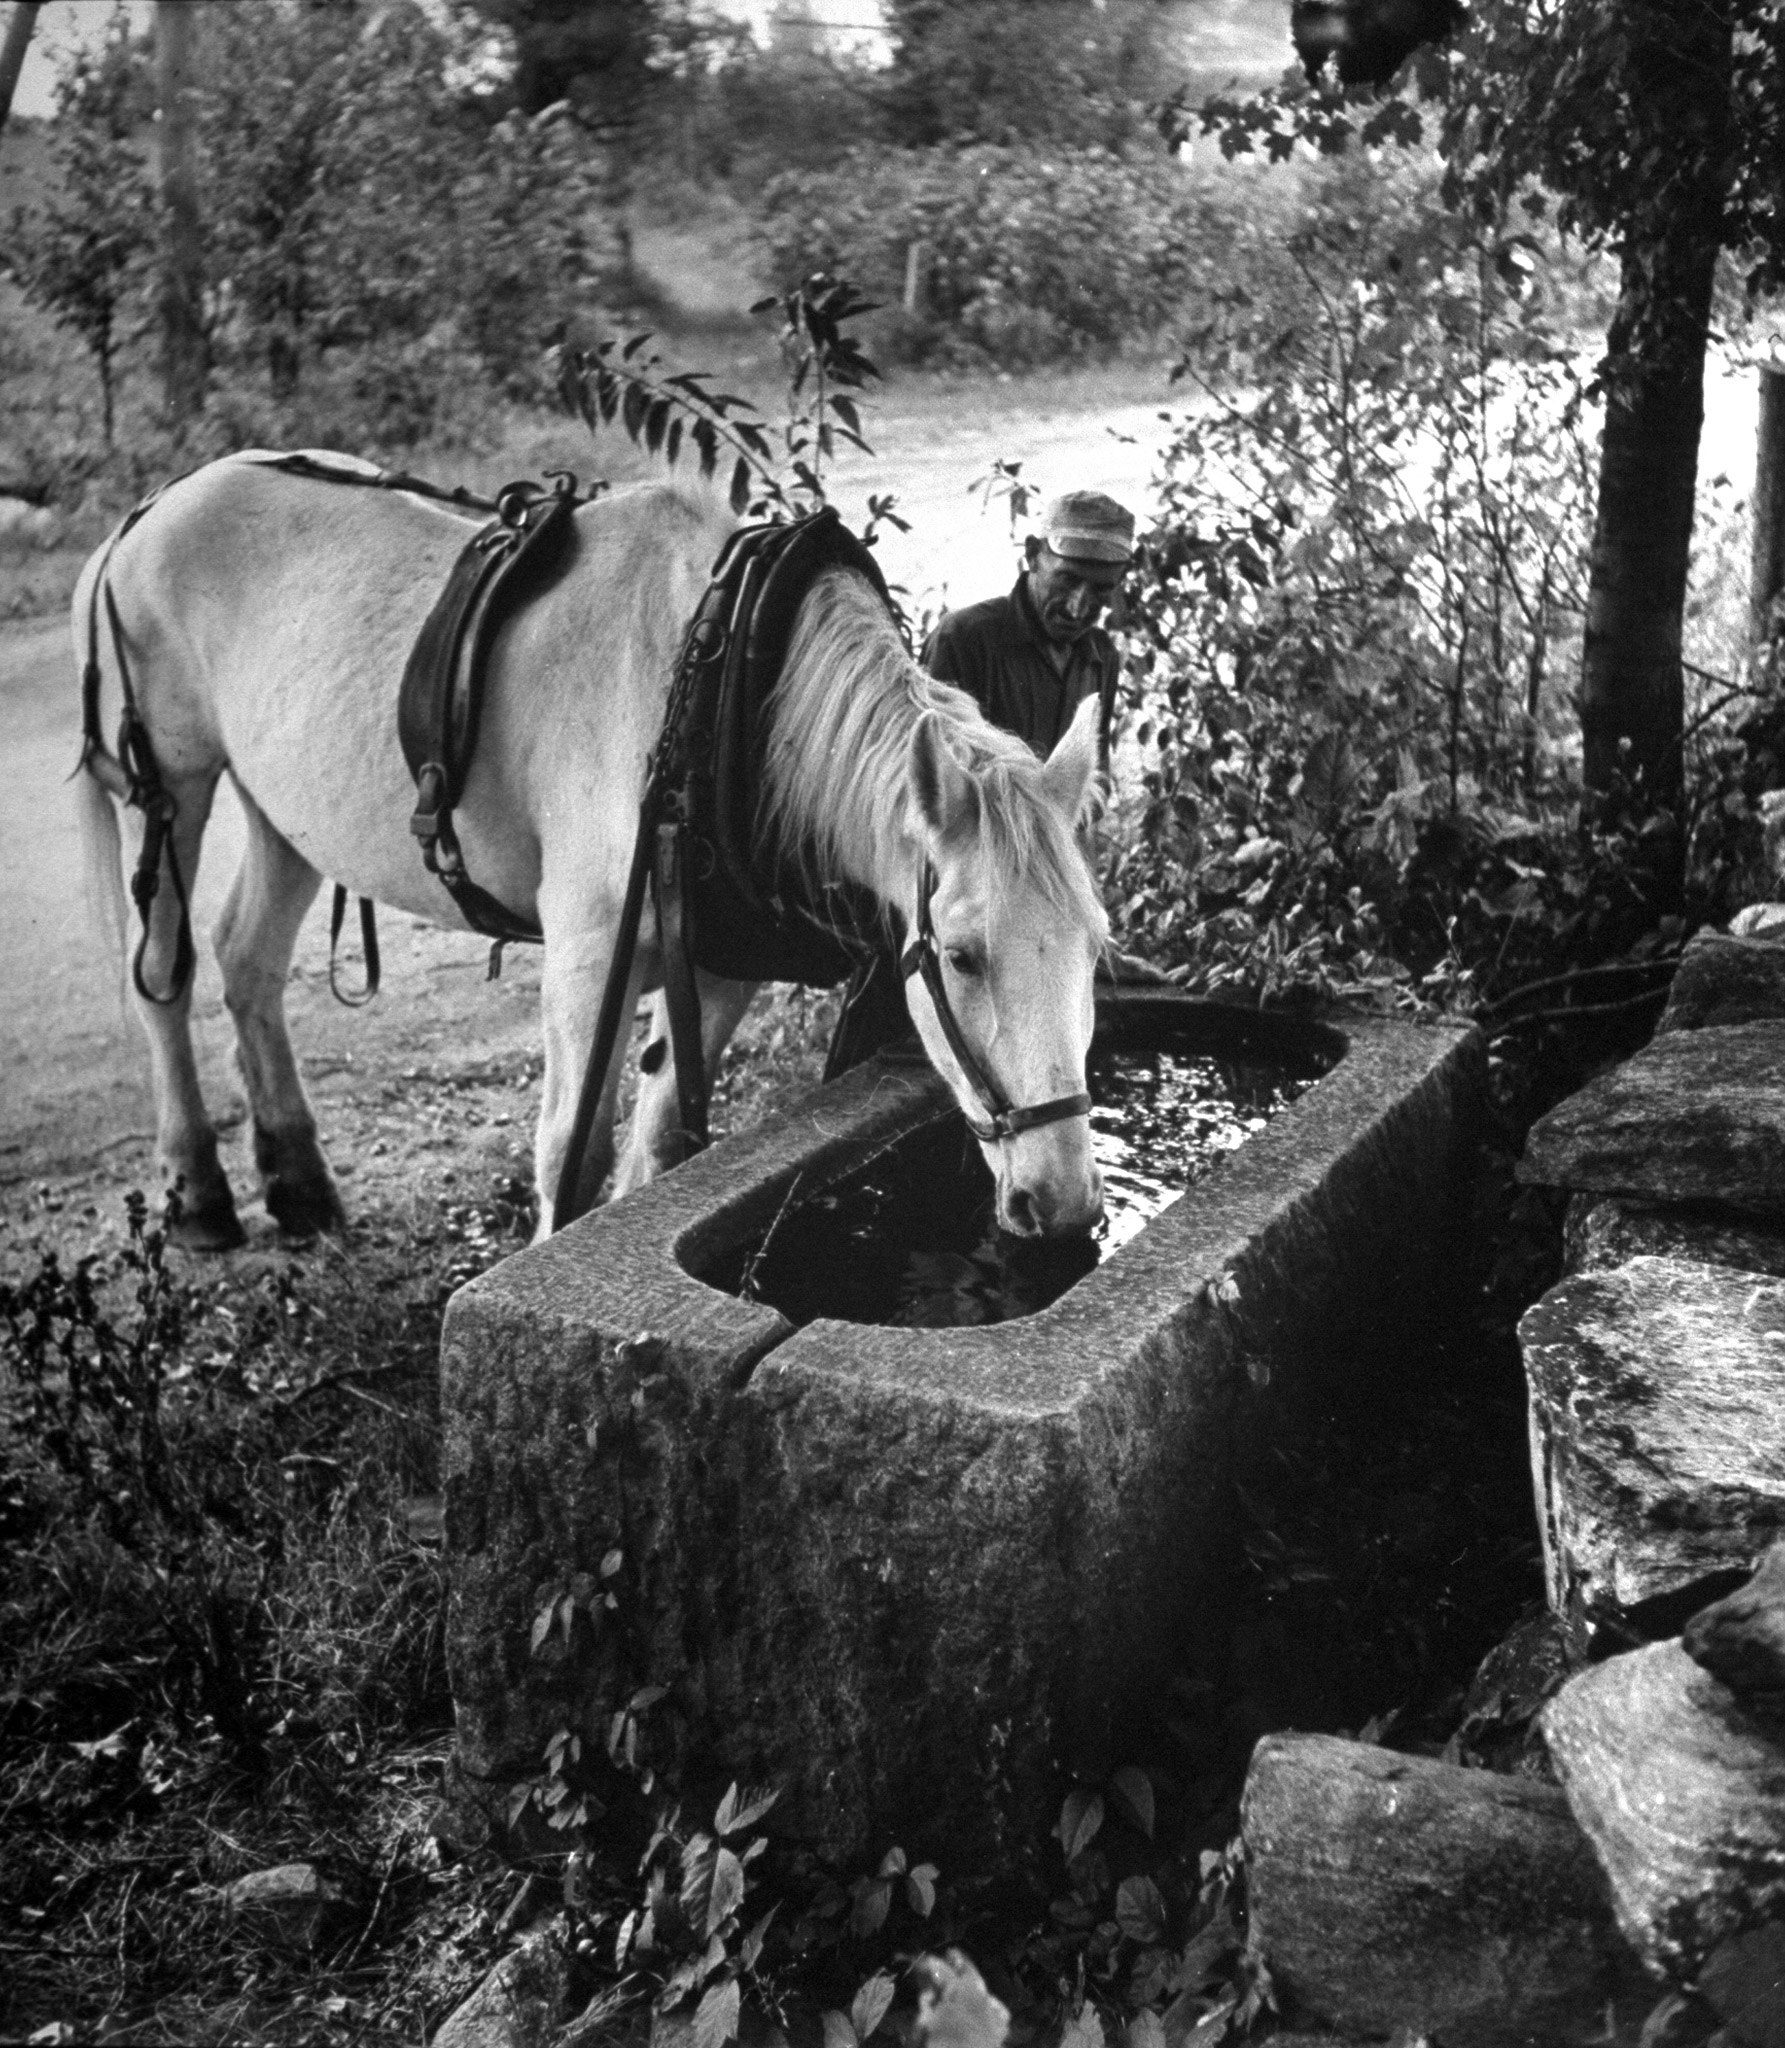 Man watching his work horse drink from a water trough, 1944.